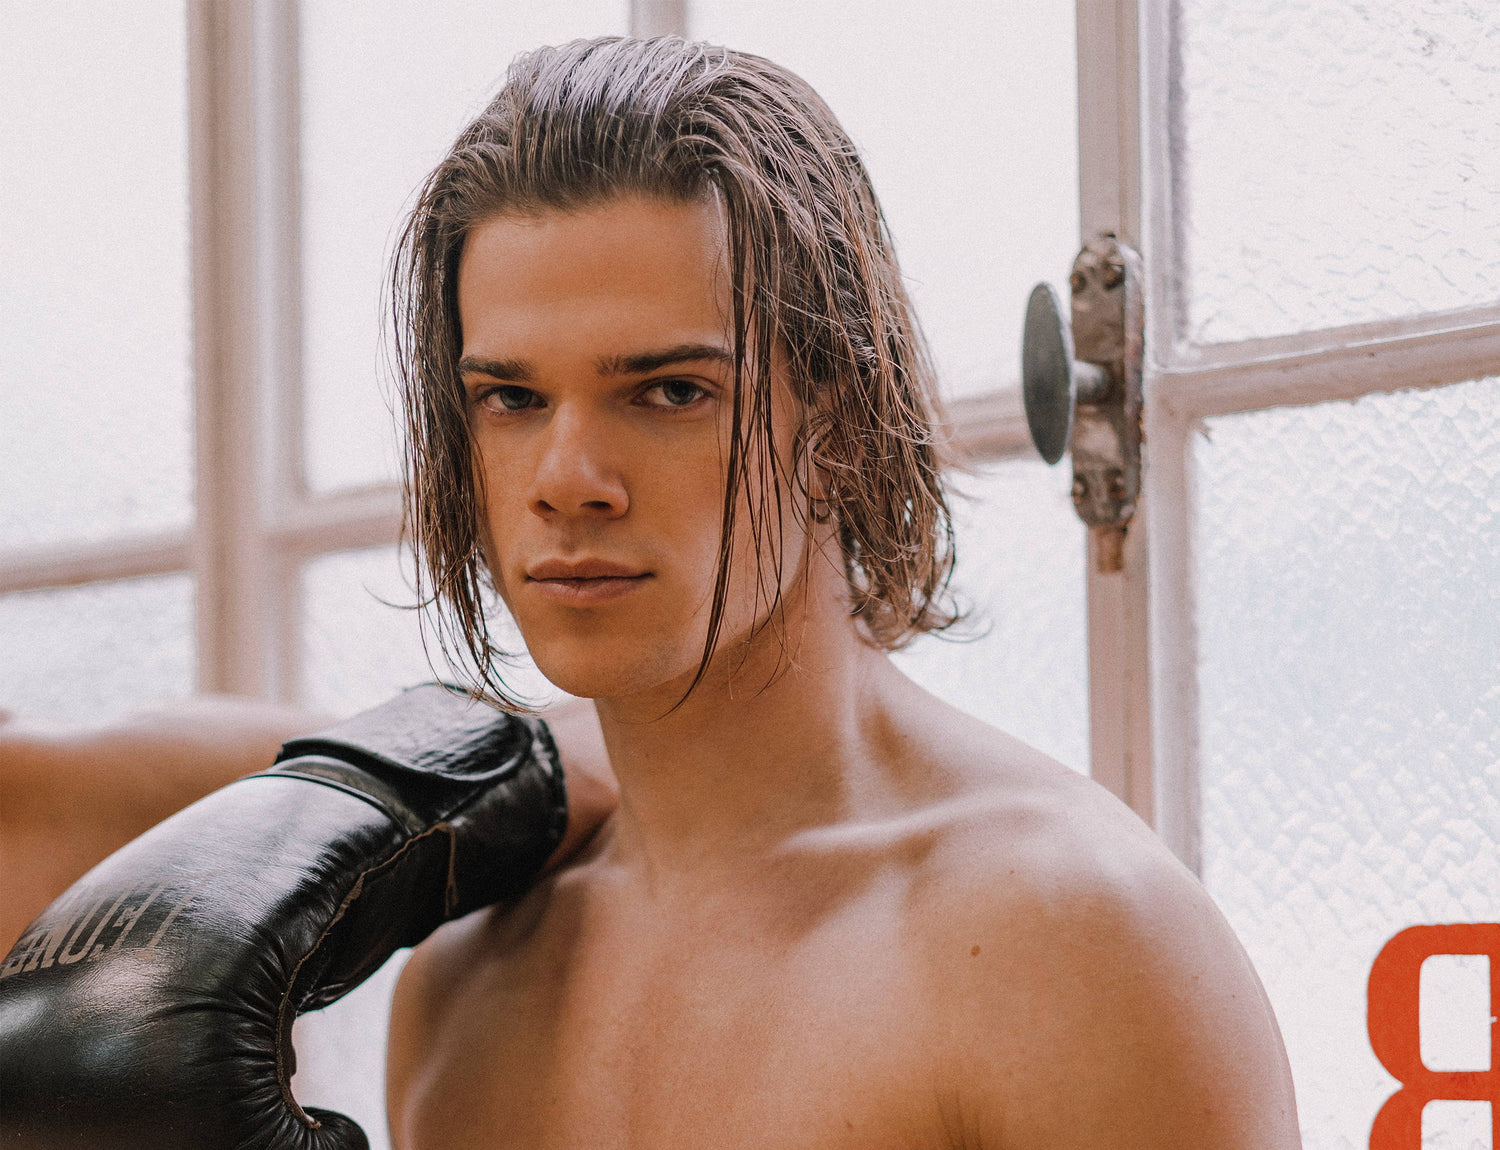 Davide Farinelli shares his experience shooting Fight Club for Yummy Issue Six naked in a boxing club and share their yummy side